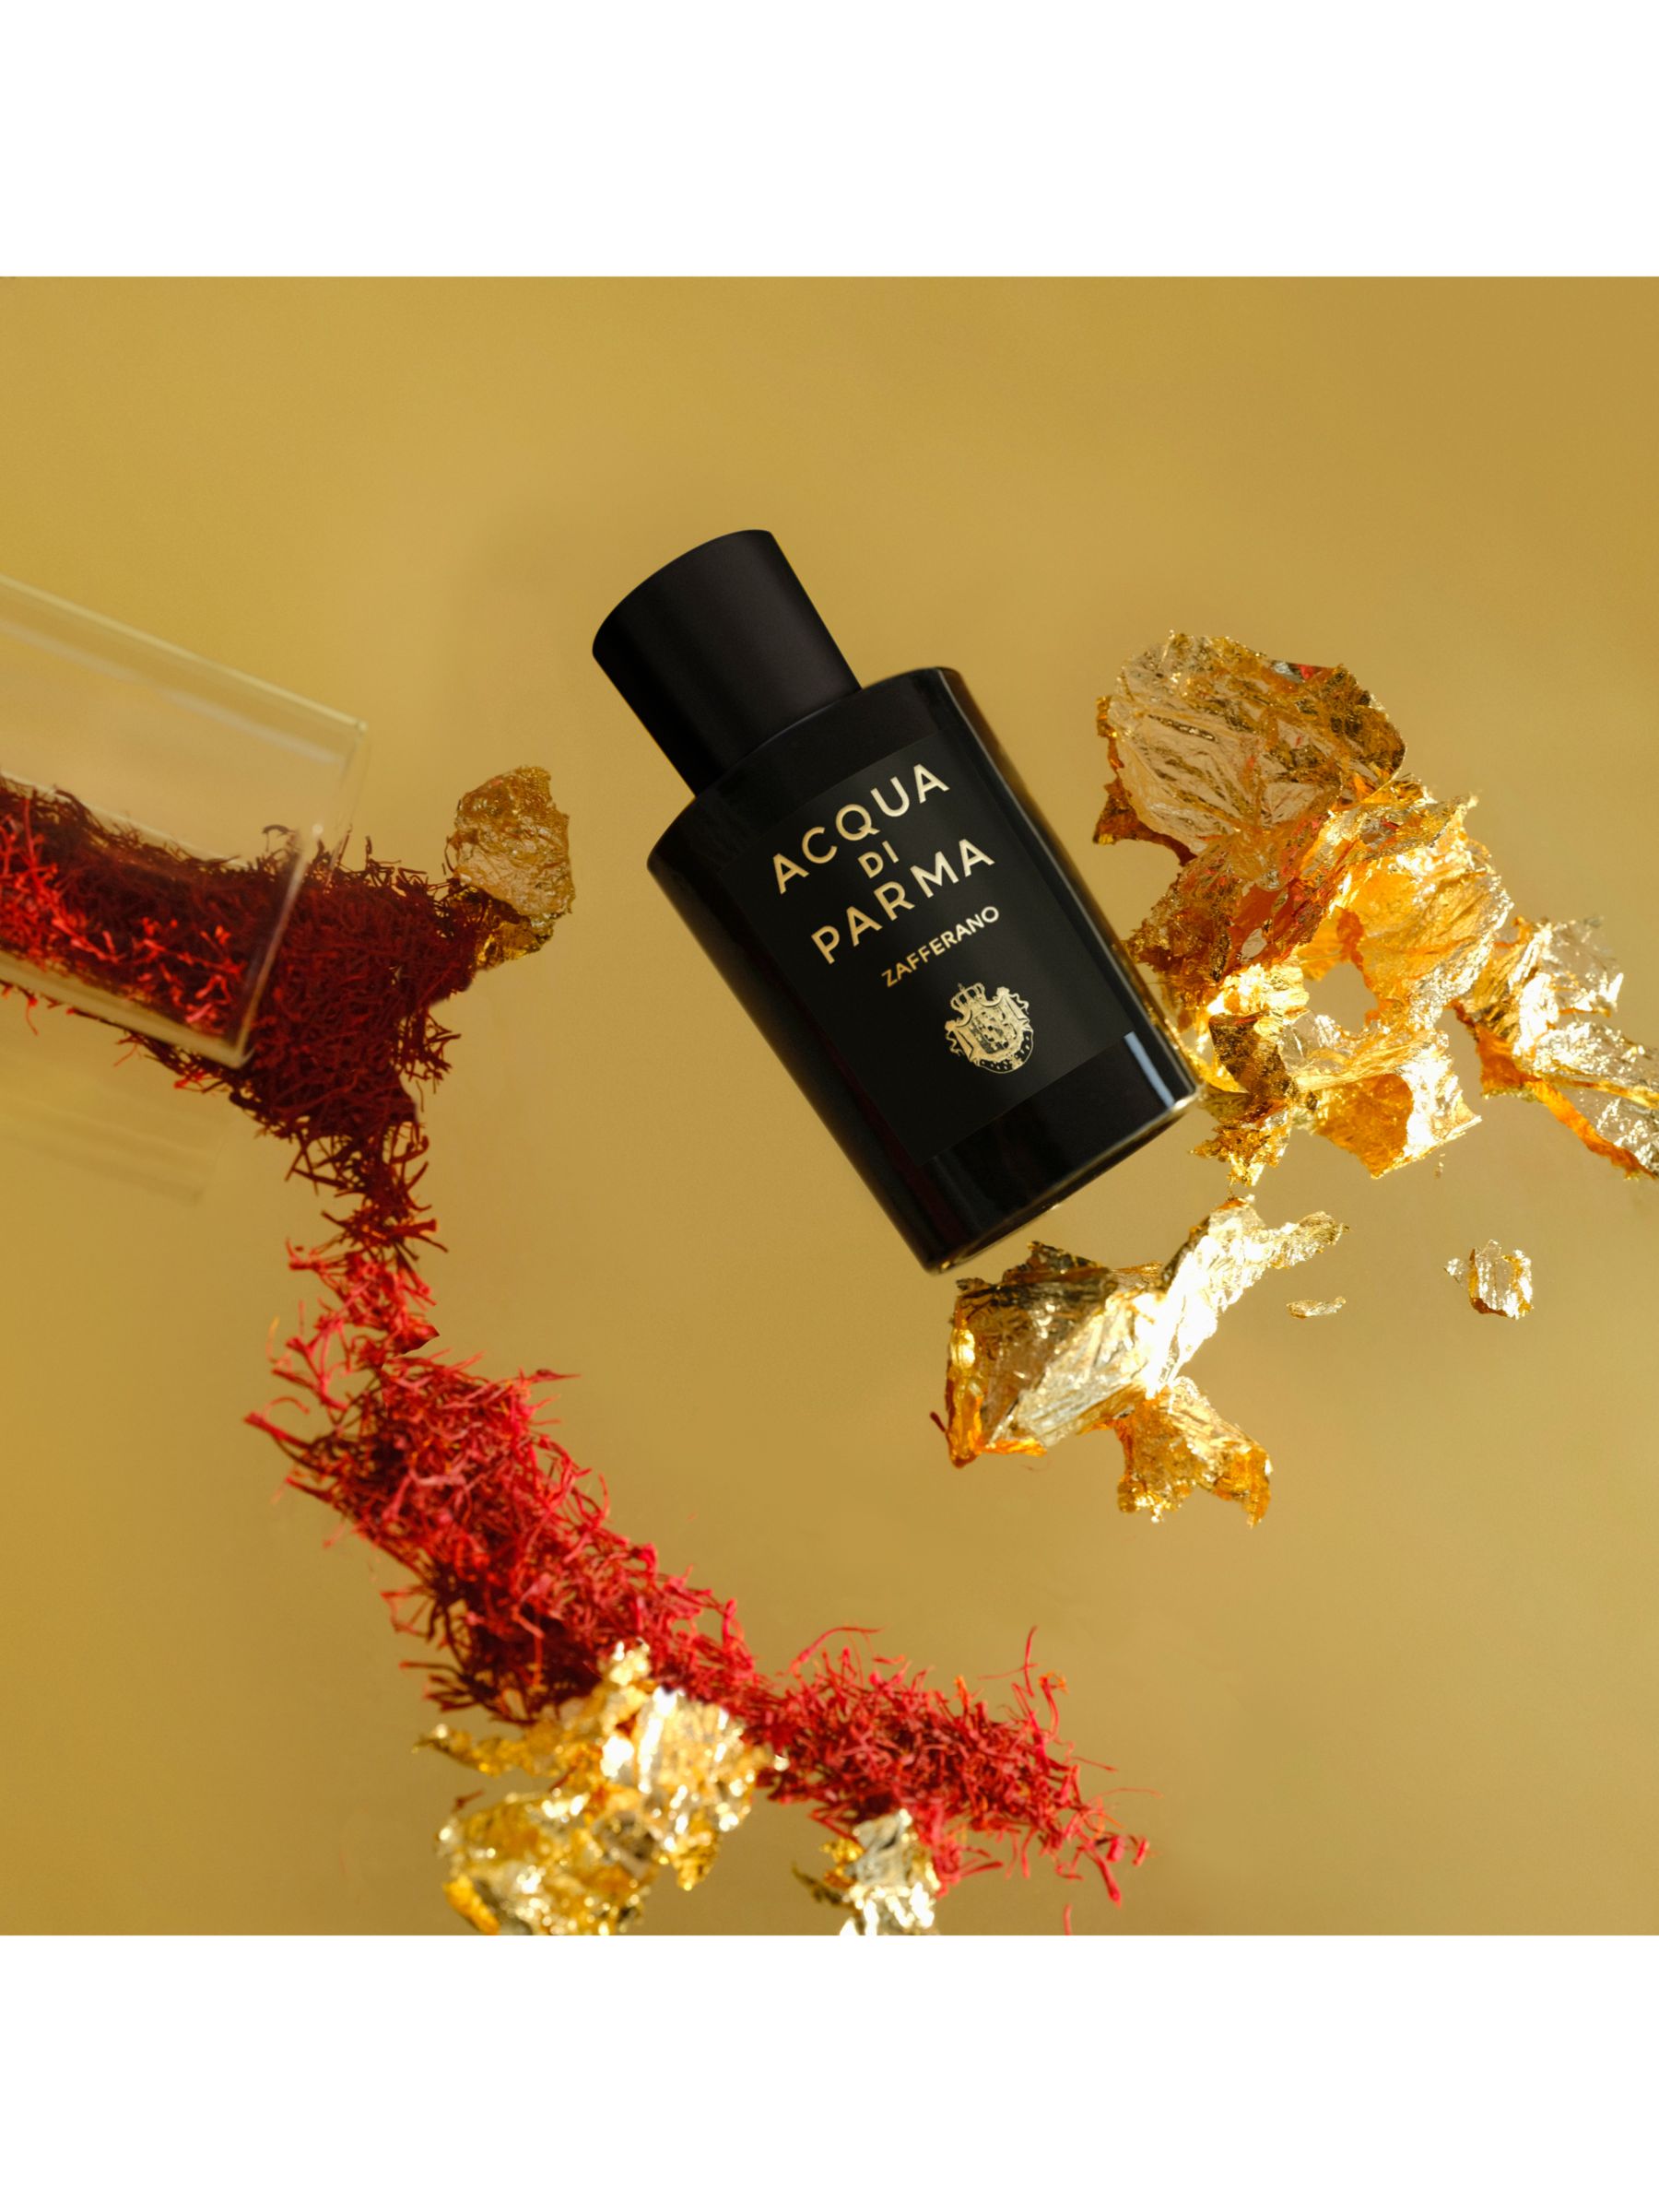 New Perfume Review Acqua di Parma Osmanthus- The Fruit to Leather